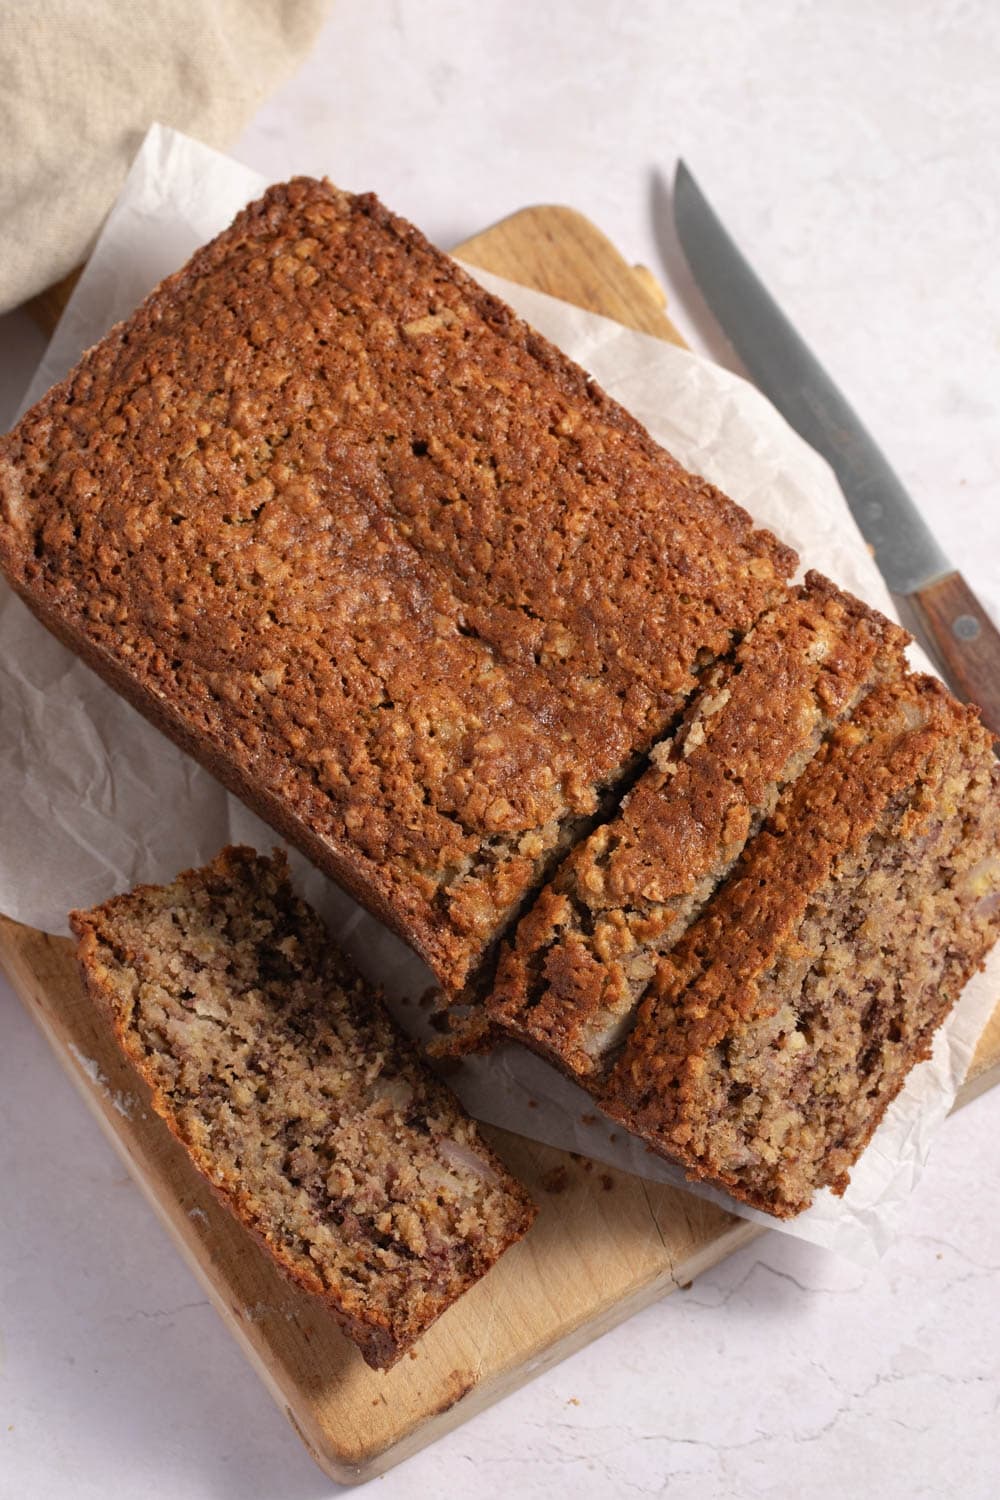 The Best Healthy Oatmeal Banana Bread featuring Partially Sliced Loaf of Warm and Fresh Oatmeal Banana Bread